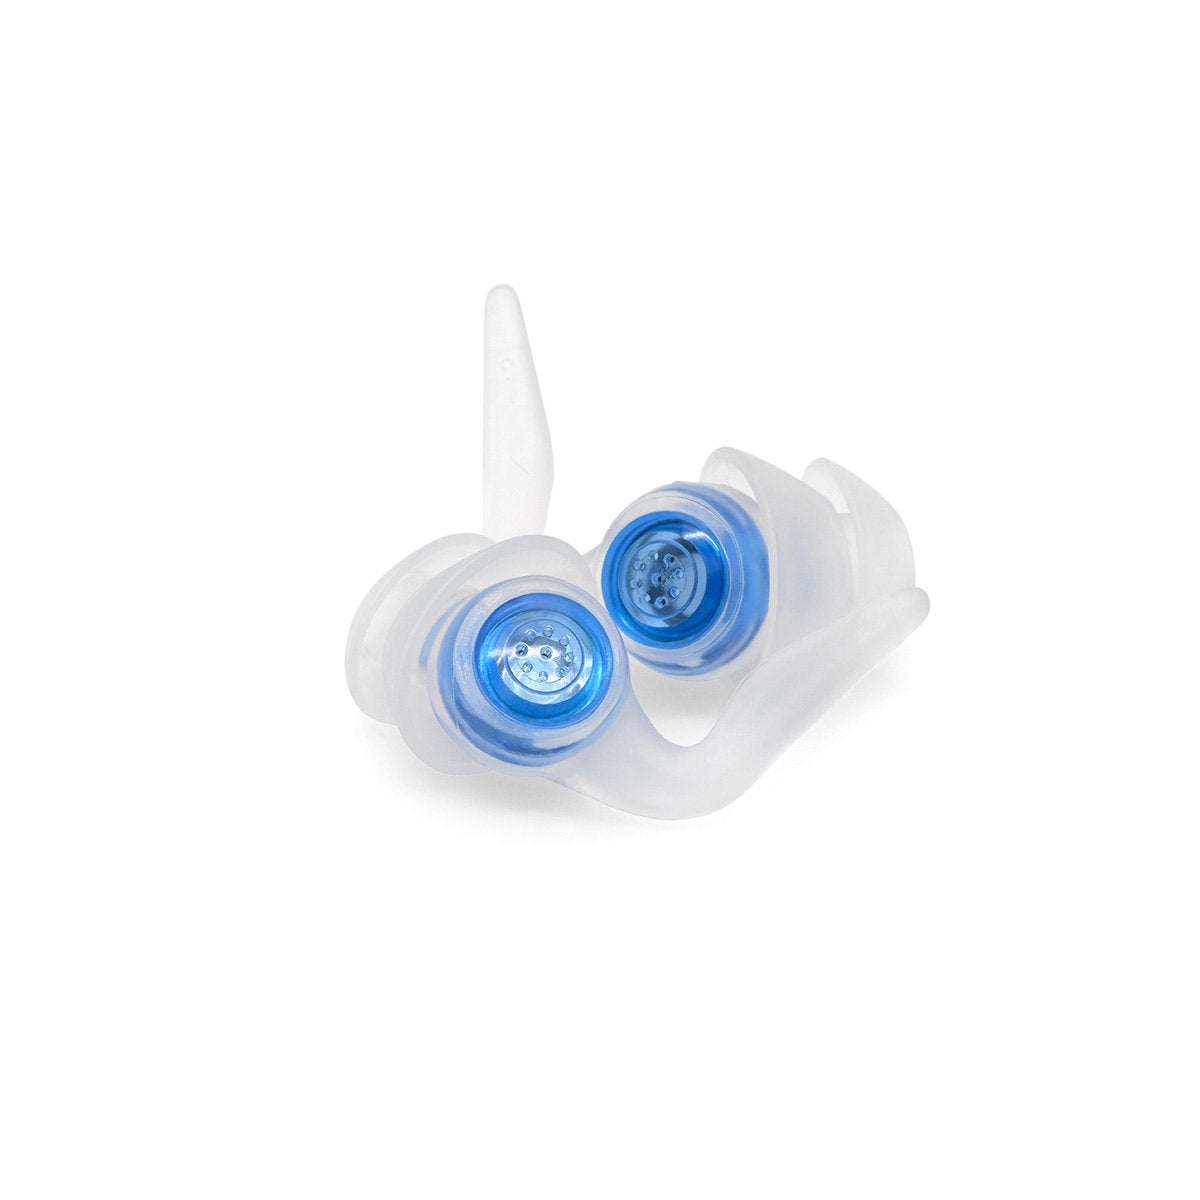 ADV. Eartune Ergo U Ear Plugs for Musicians and Concert